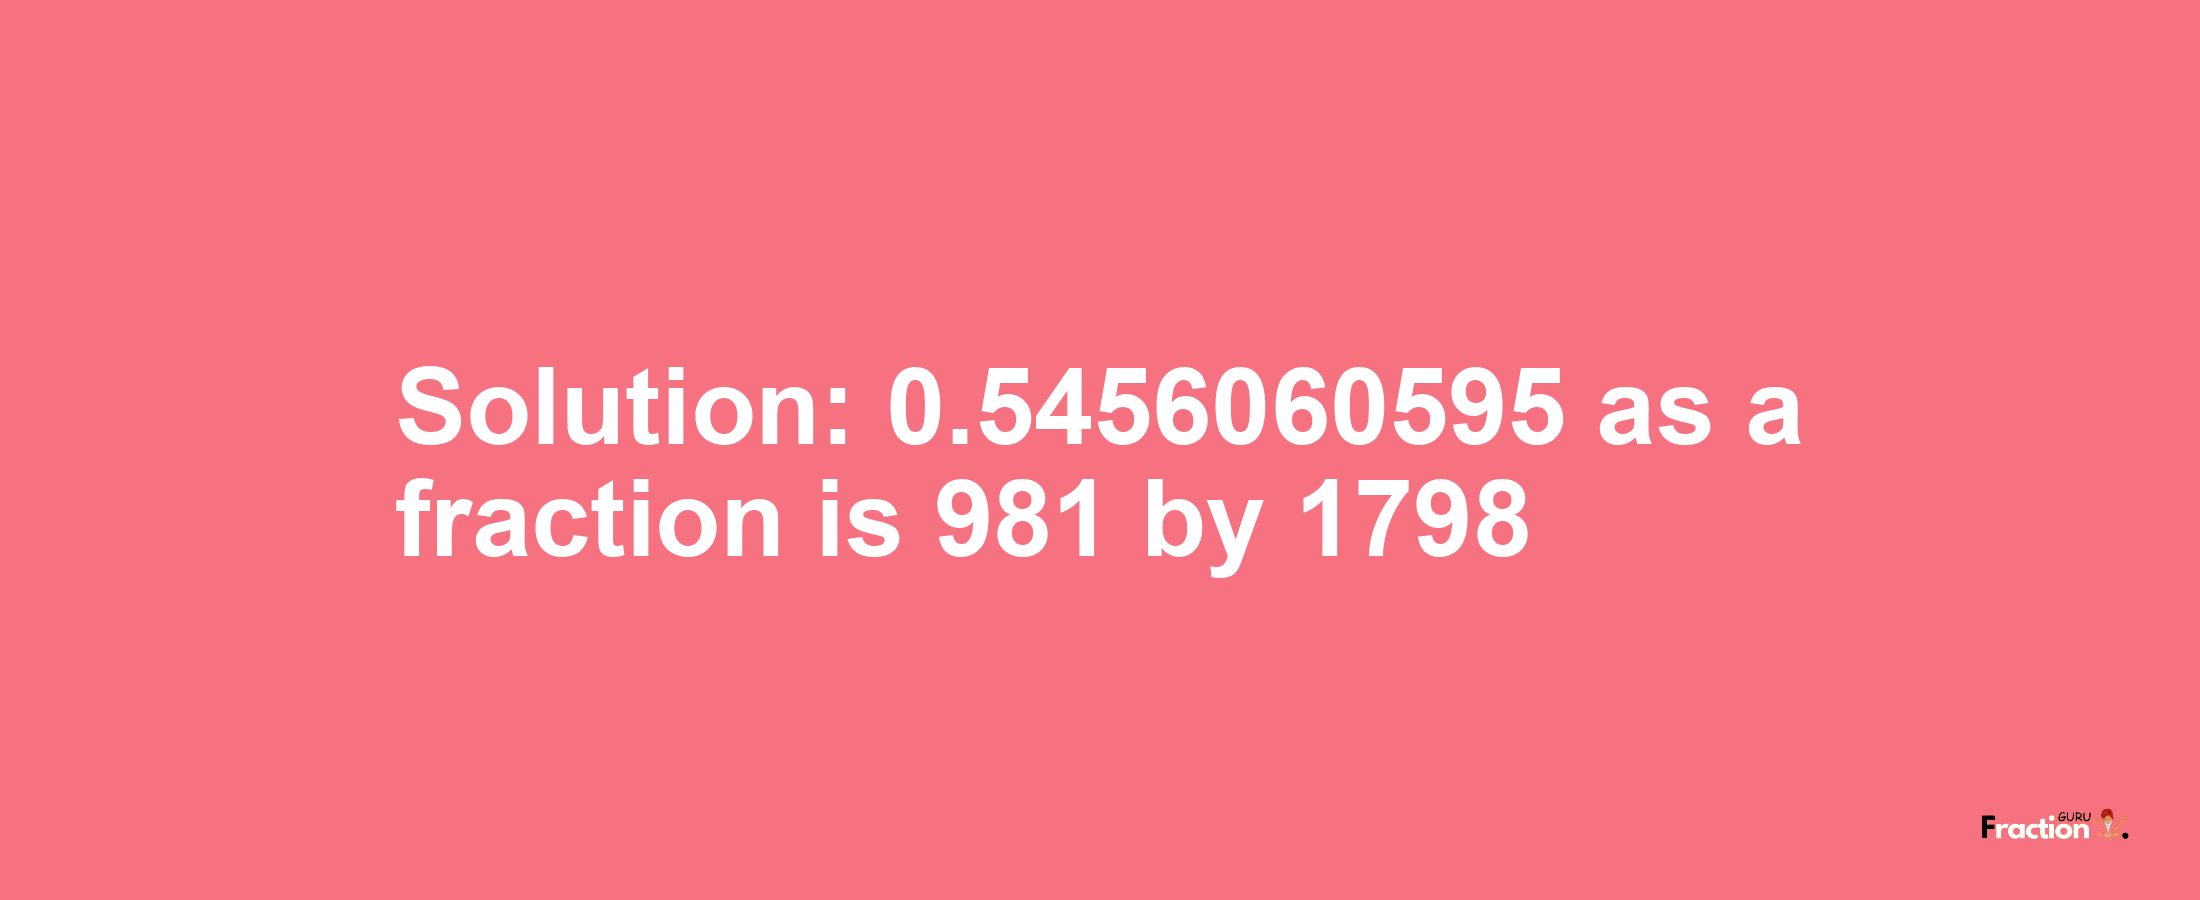 Solution:0.5456060595 as a fraction is 981/1798